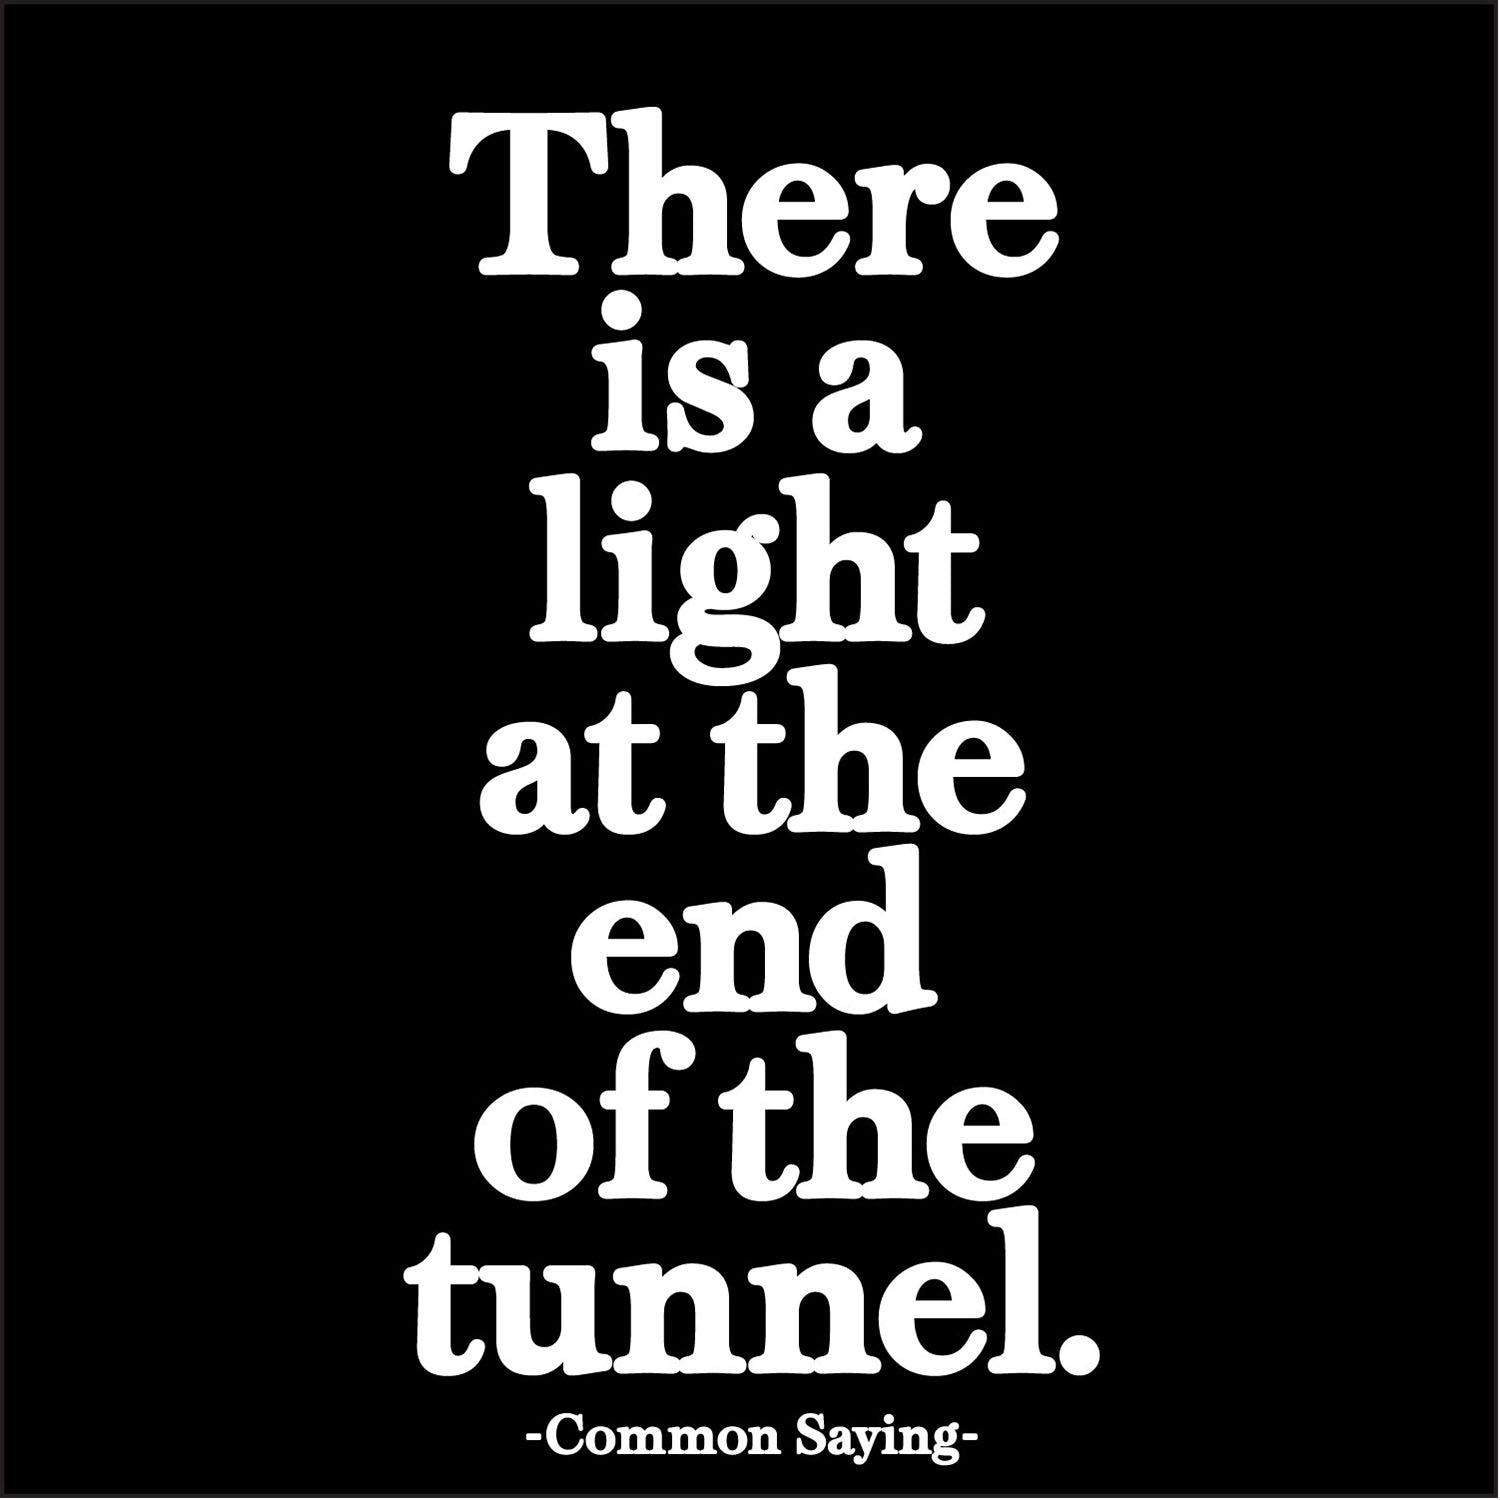 There is a light at the end of the tunnel